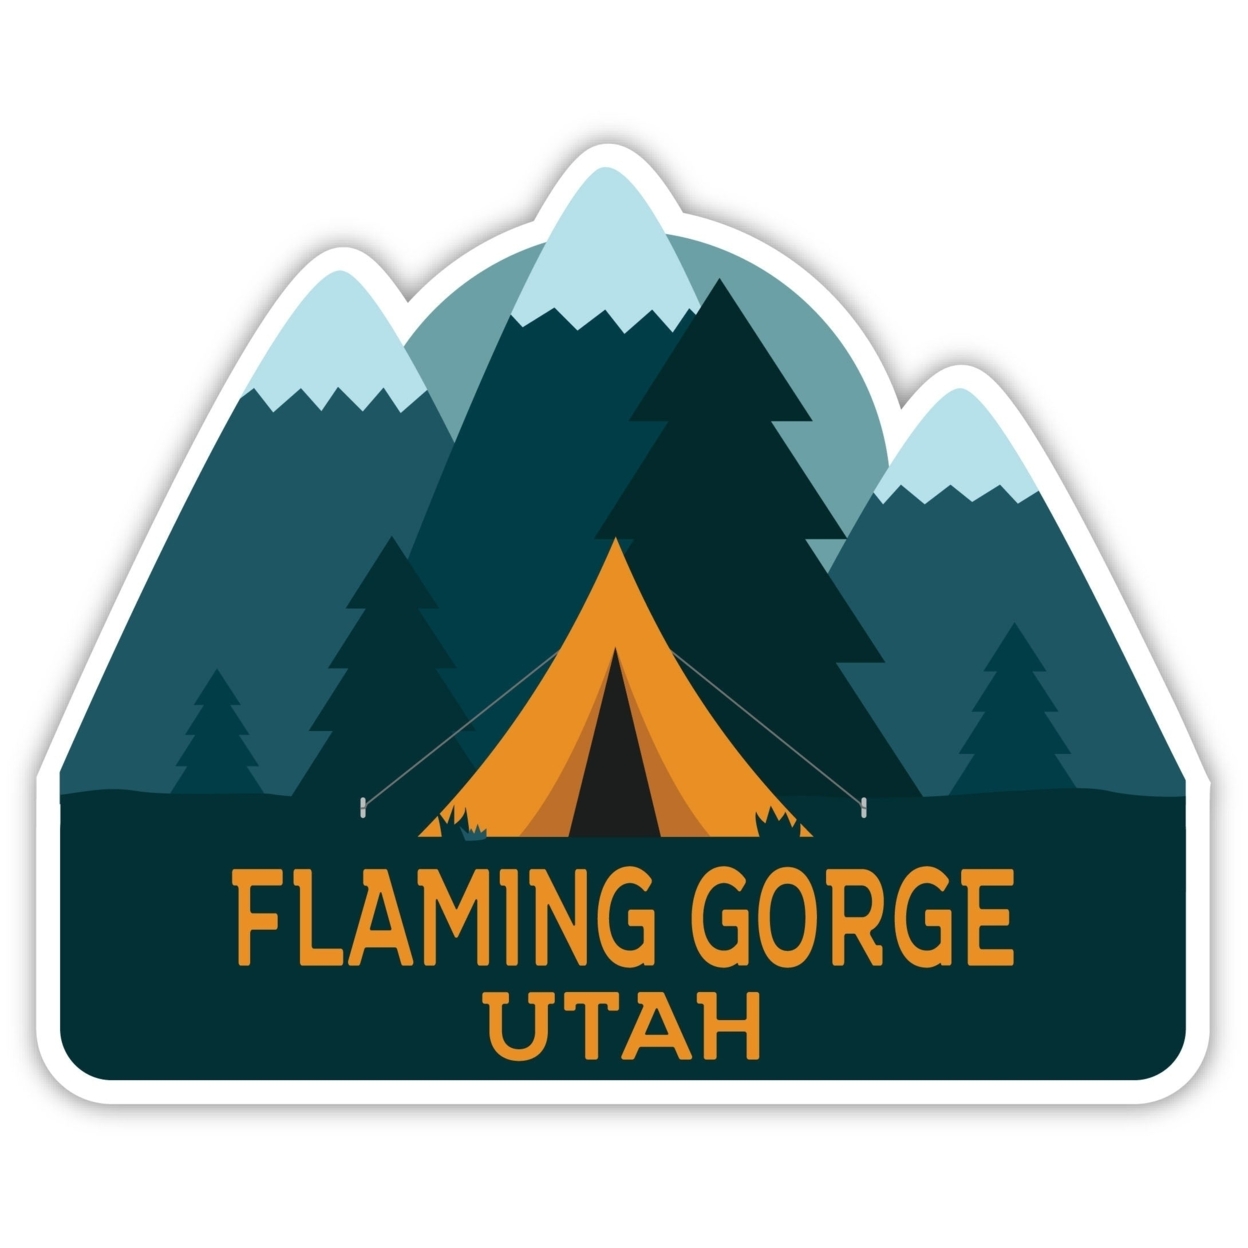 Flaming Gorge Utah Souvenir Decorative Stickers (Choose Theme And Size) - 4-Pack, 12-Inch, Adventures Awaits